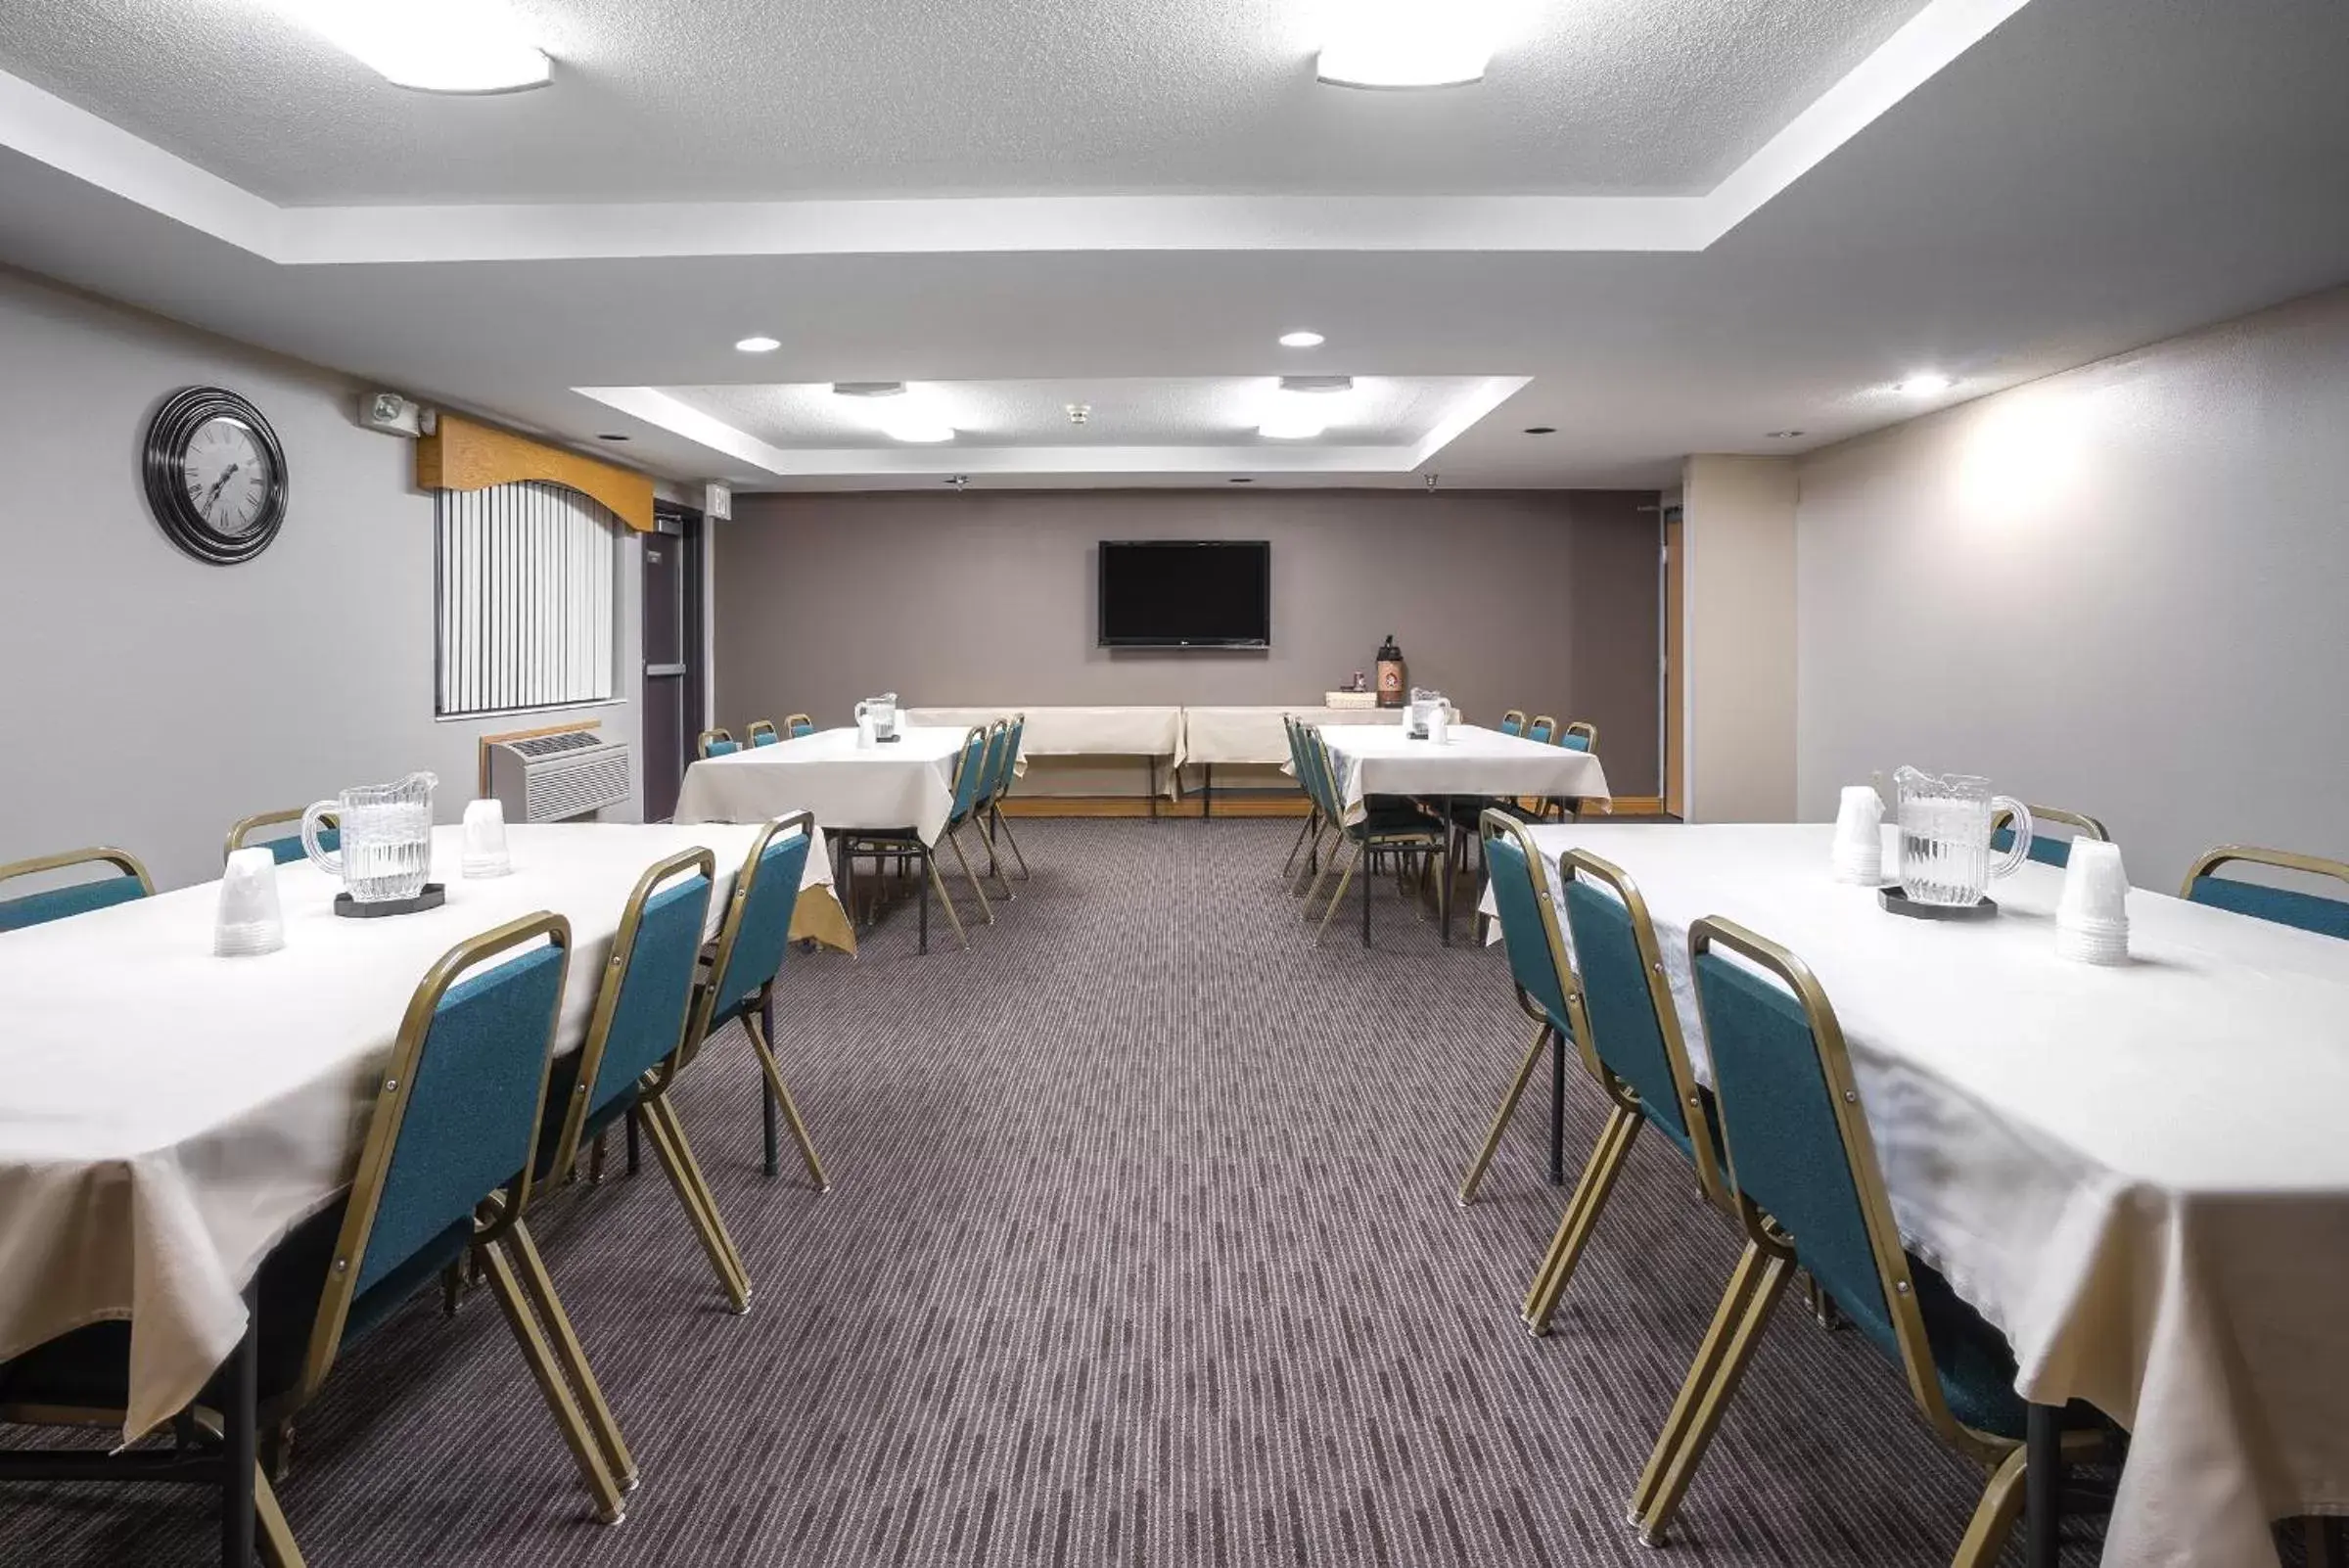 Banquet/Function facilities in AmericInn by Wyndham North Branch